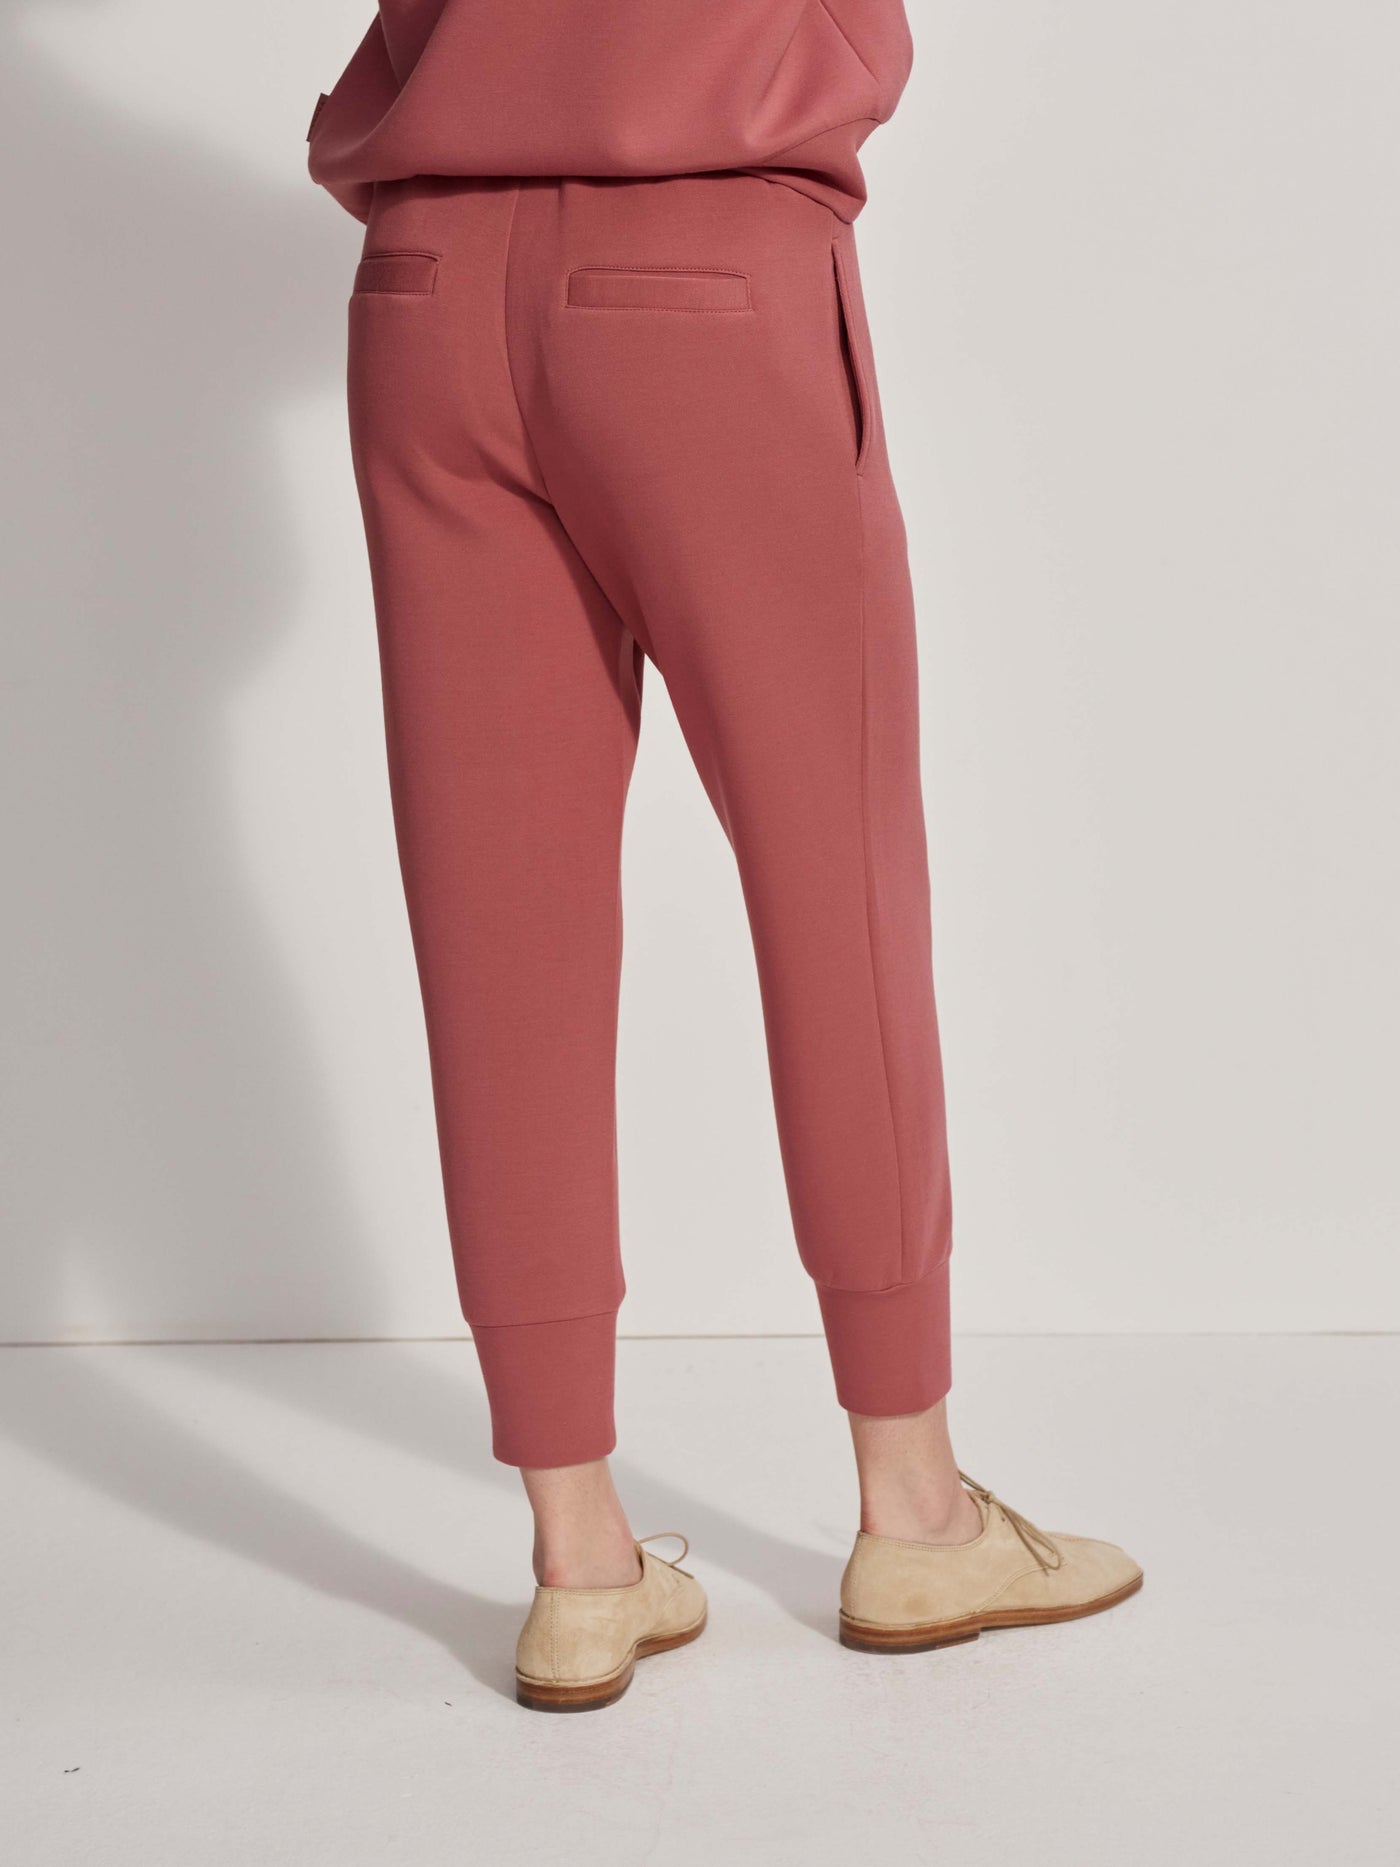 Varley Slim Cuff Pant 25 - Withered Rose